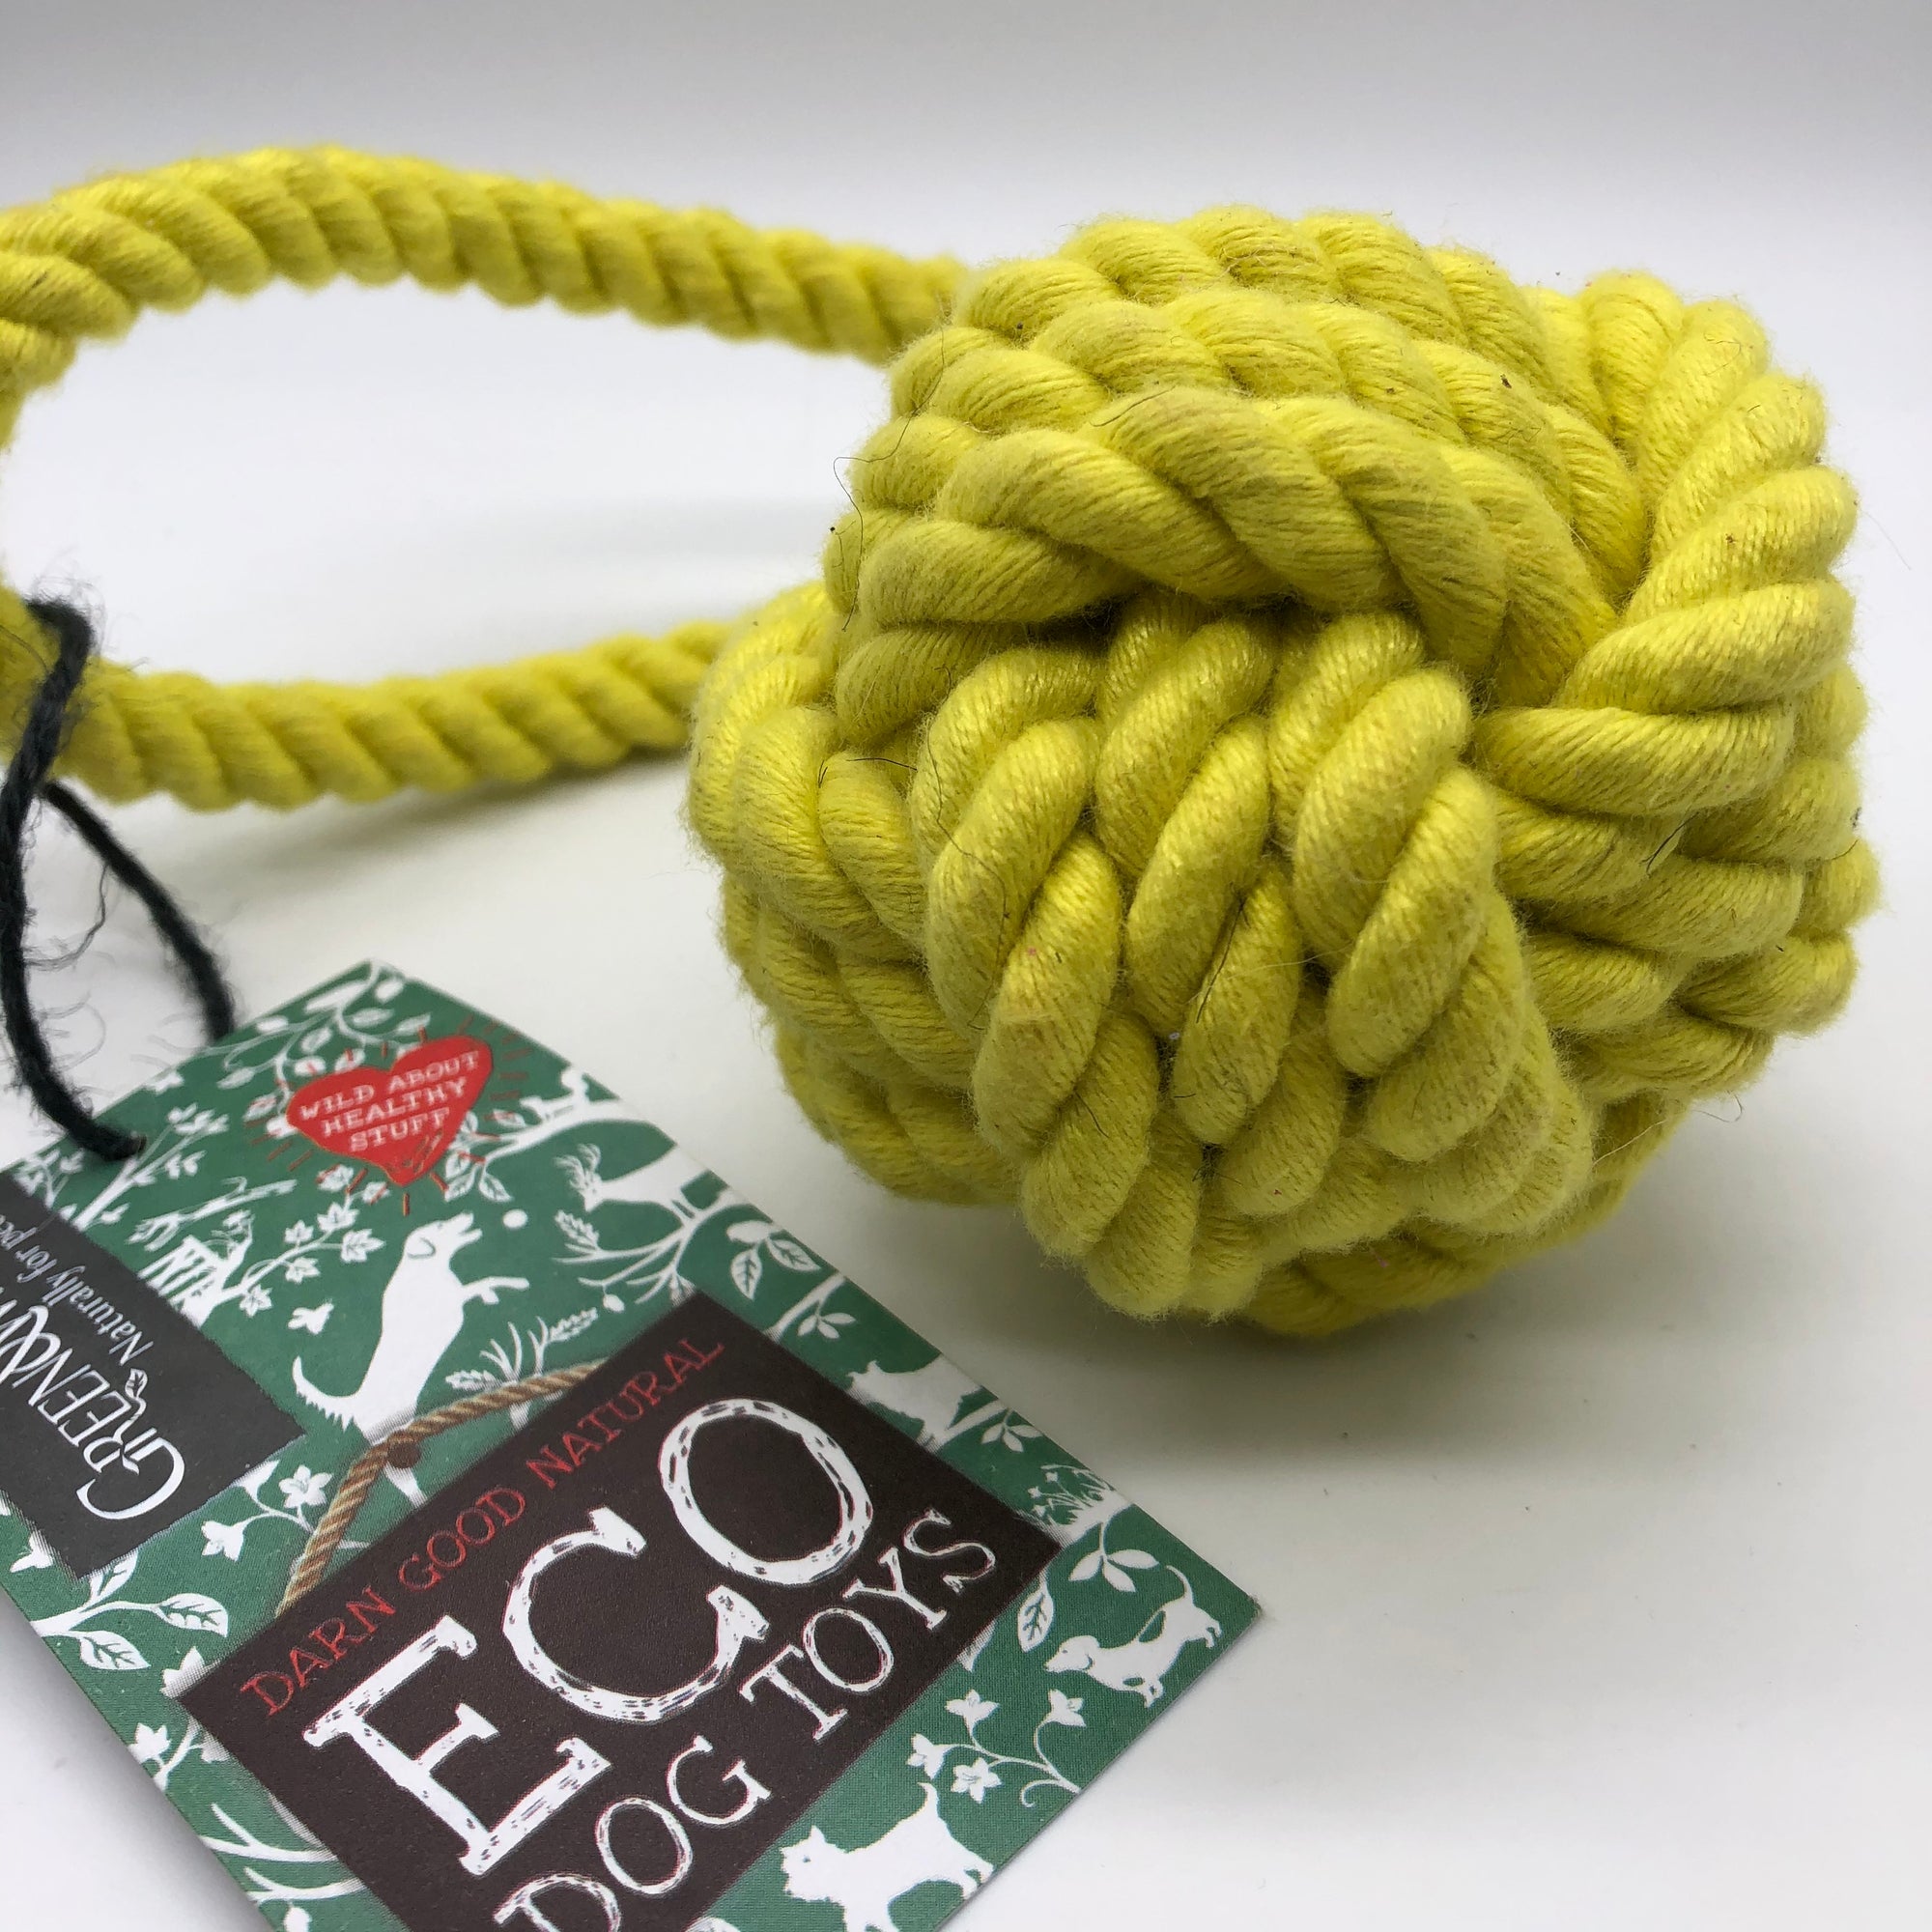 Rope ball eco friendly dog toy